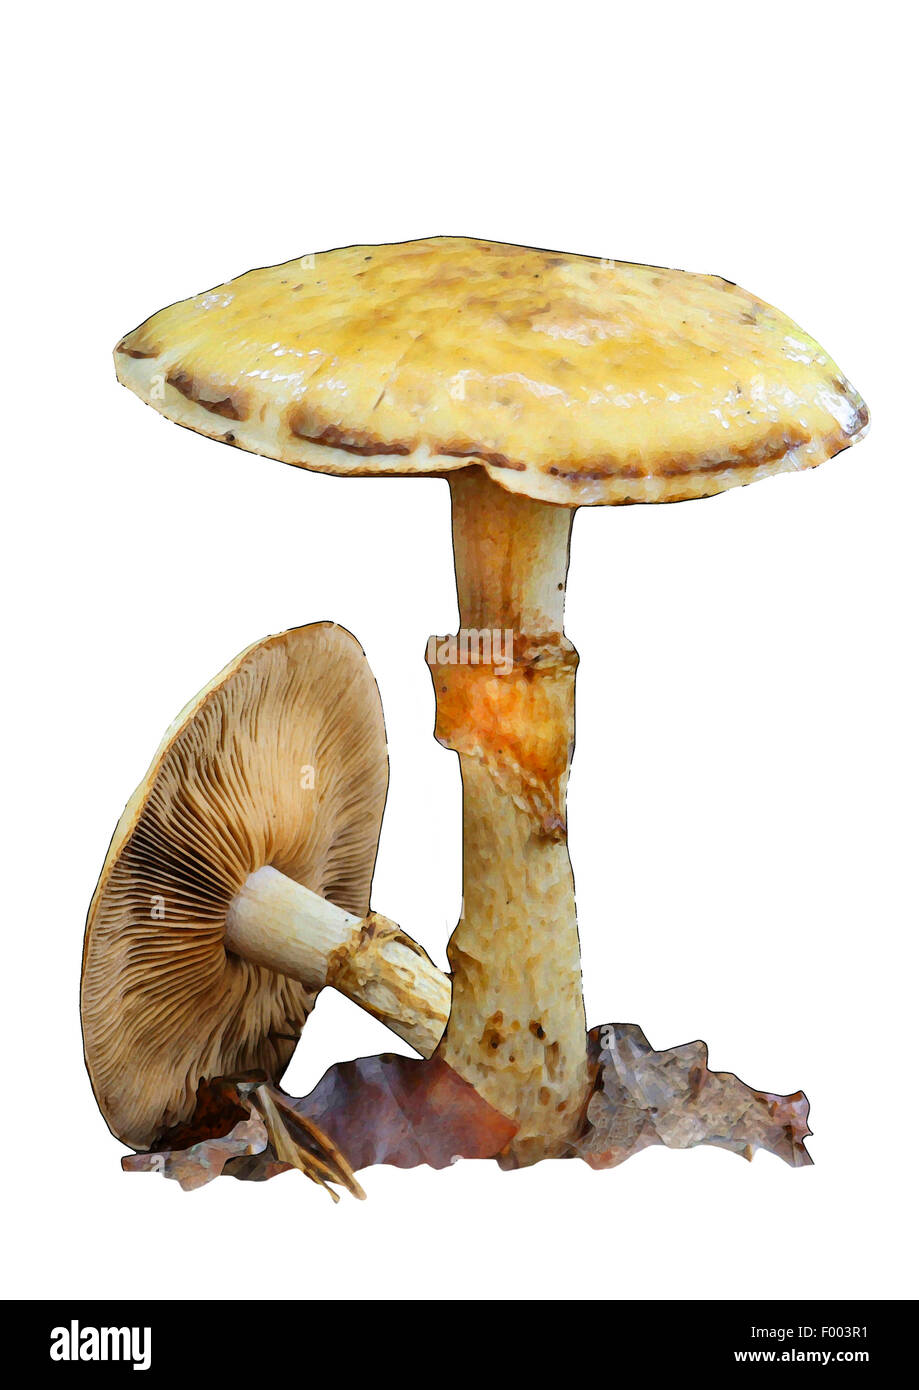 rooting poisonpie (Hebeloma radicosum), two fruiting bodies, cut-out Stock Photo